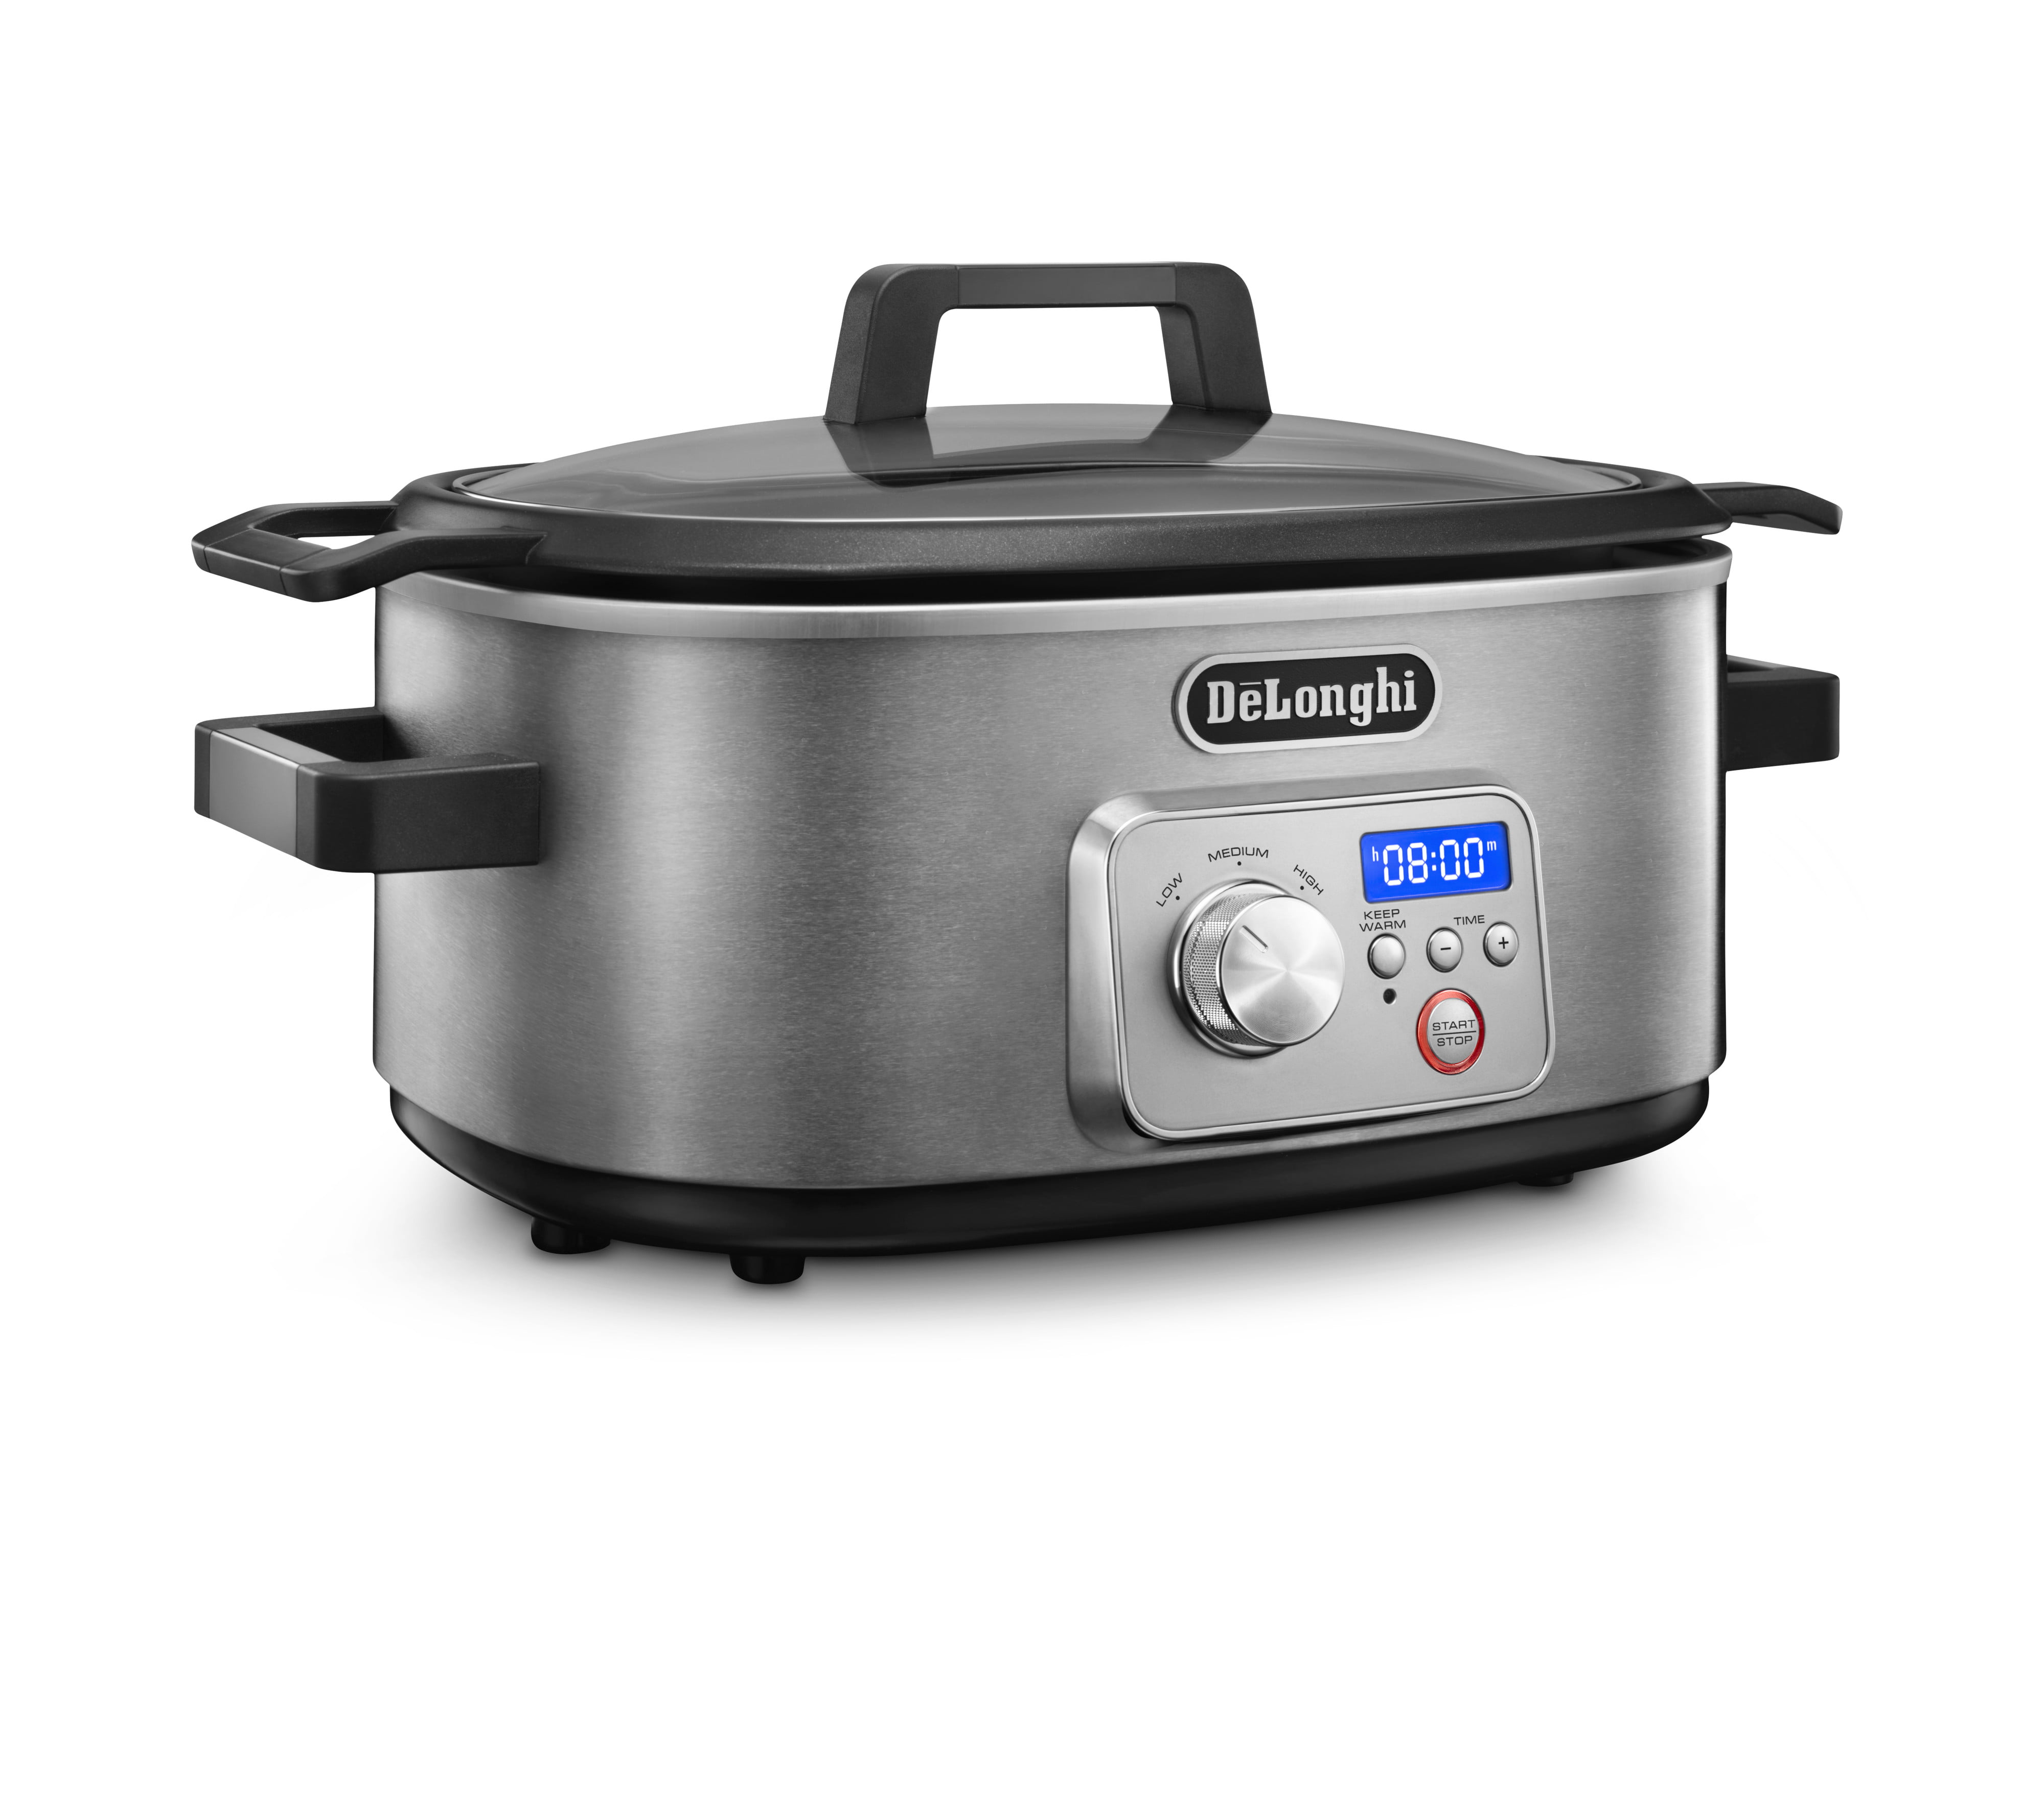 Double Sided Slow Cooker!, slow cooker, This is like my dream come true!   By Passion For Savings